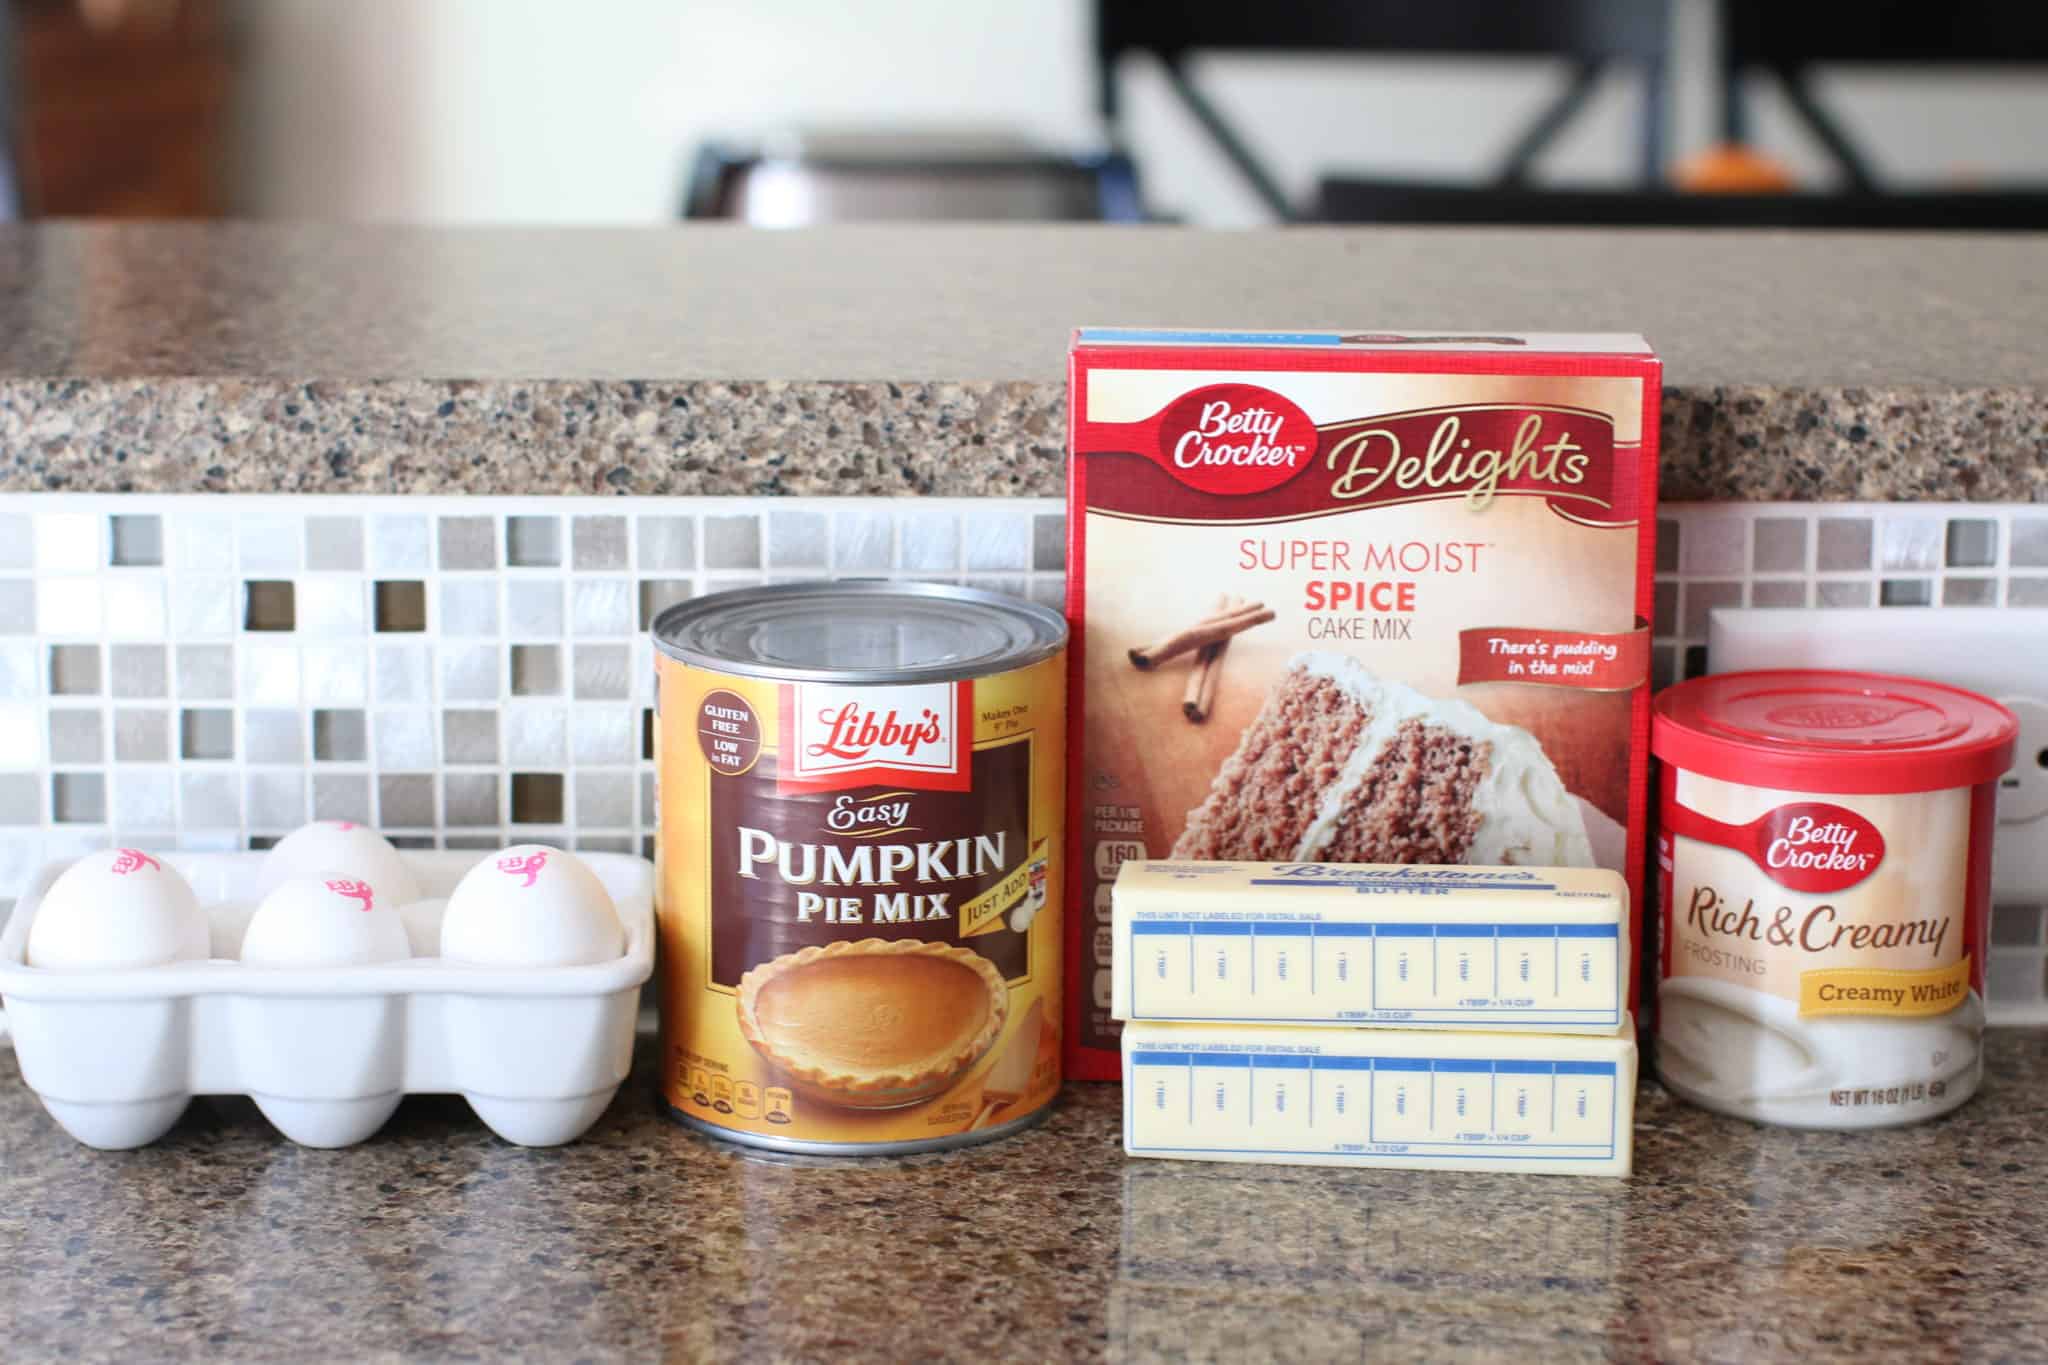 ingredients needed: boxed spice cake mix, eggs, pumpkin pie filling, butter, tub of vanilla frosting.